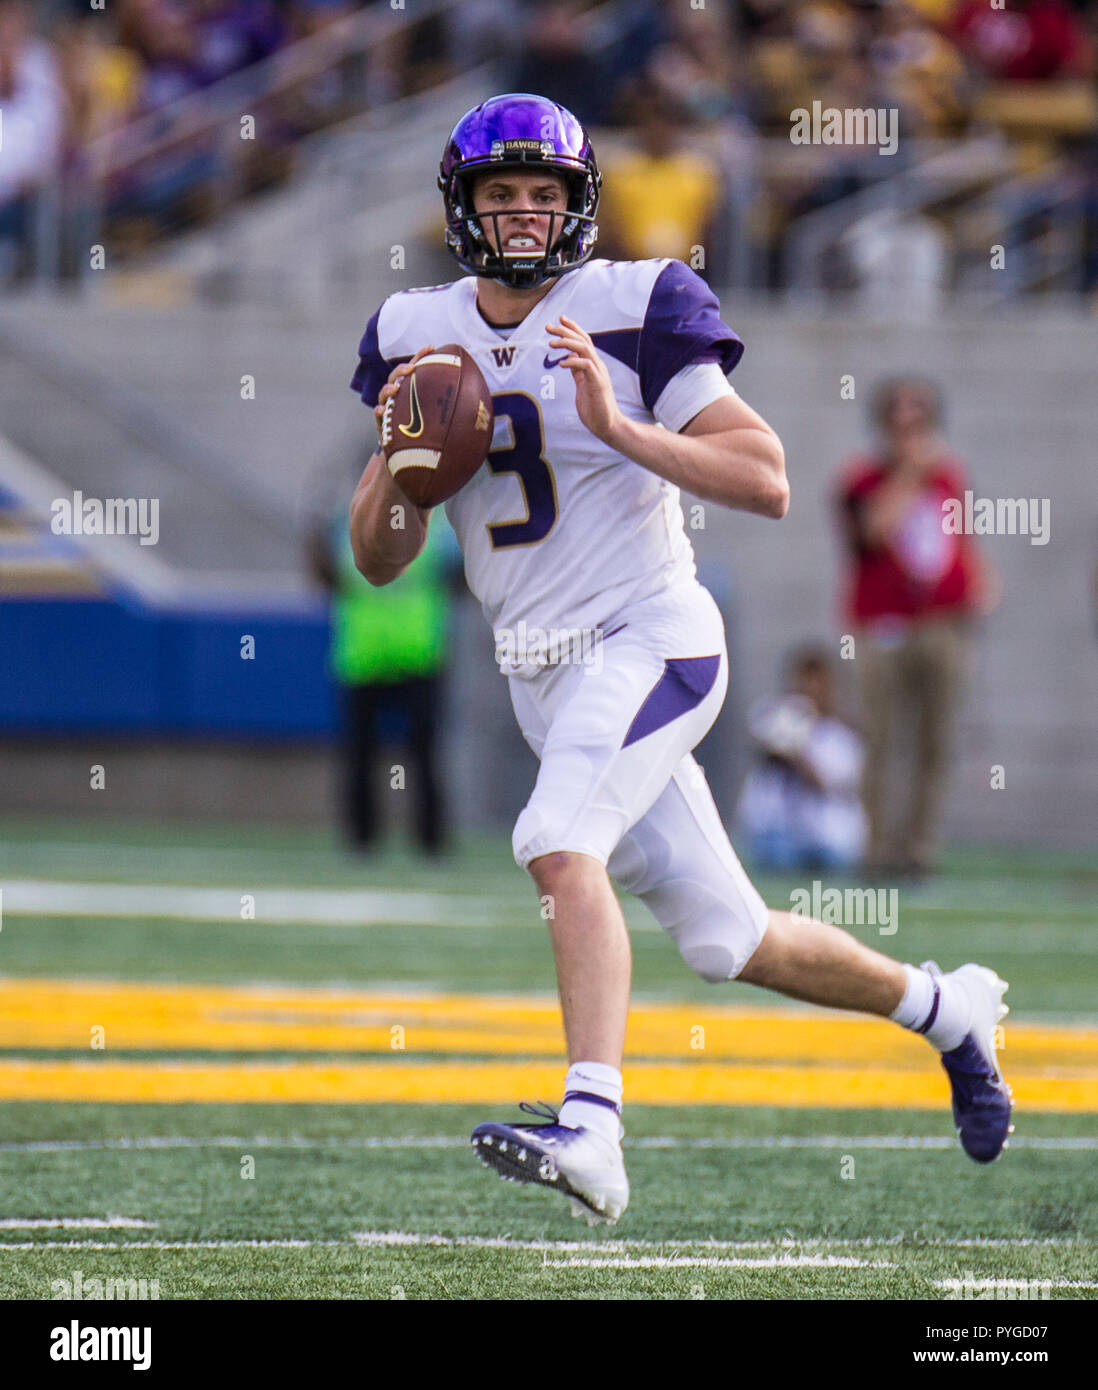 California Memorial Stadium. 27th Oct, 2018. U.S.A. Washington quarterback Jake Browning (3) game stats 11 for 21 for 148 yards and 1 touchdown looks down field for a deep pass during the NCAA Football game between Washington Huskies and the California Golden Bears 10-12 lost at California Memorial Stadium. Thurman James/CSM/Alamy Live News Stock Photo